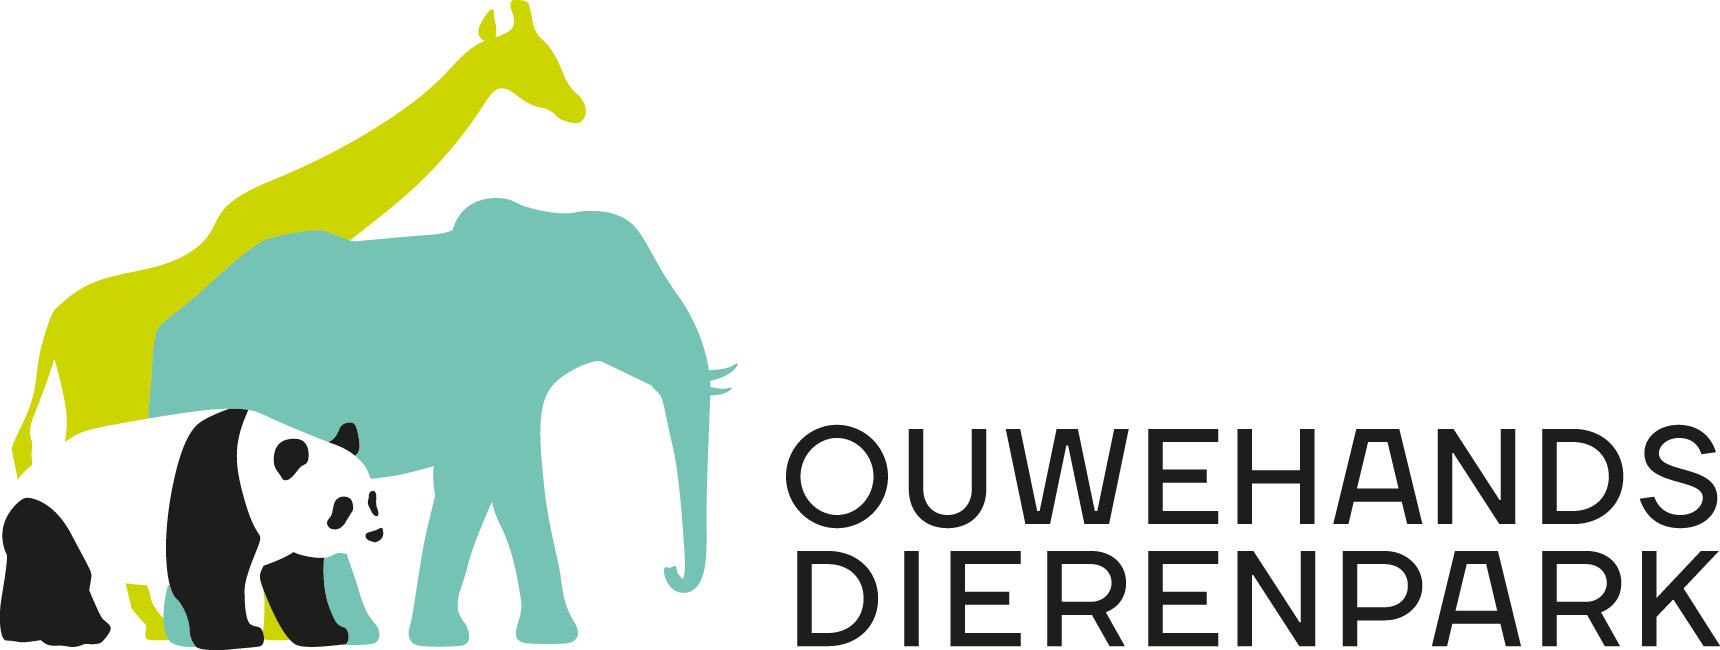 ouwehands_dierenpark_donker_logo.png